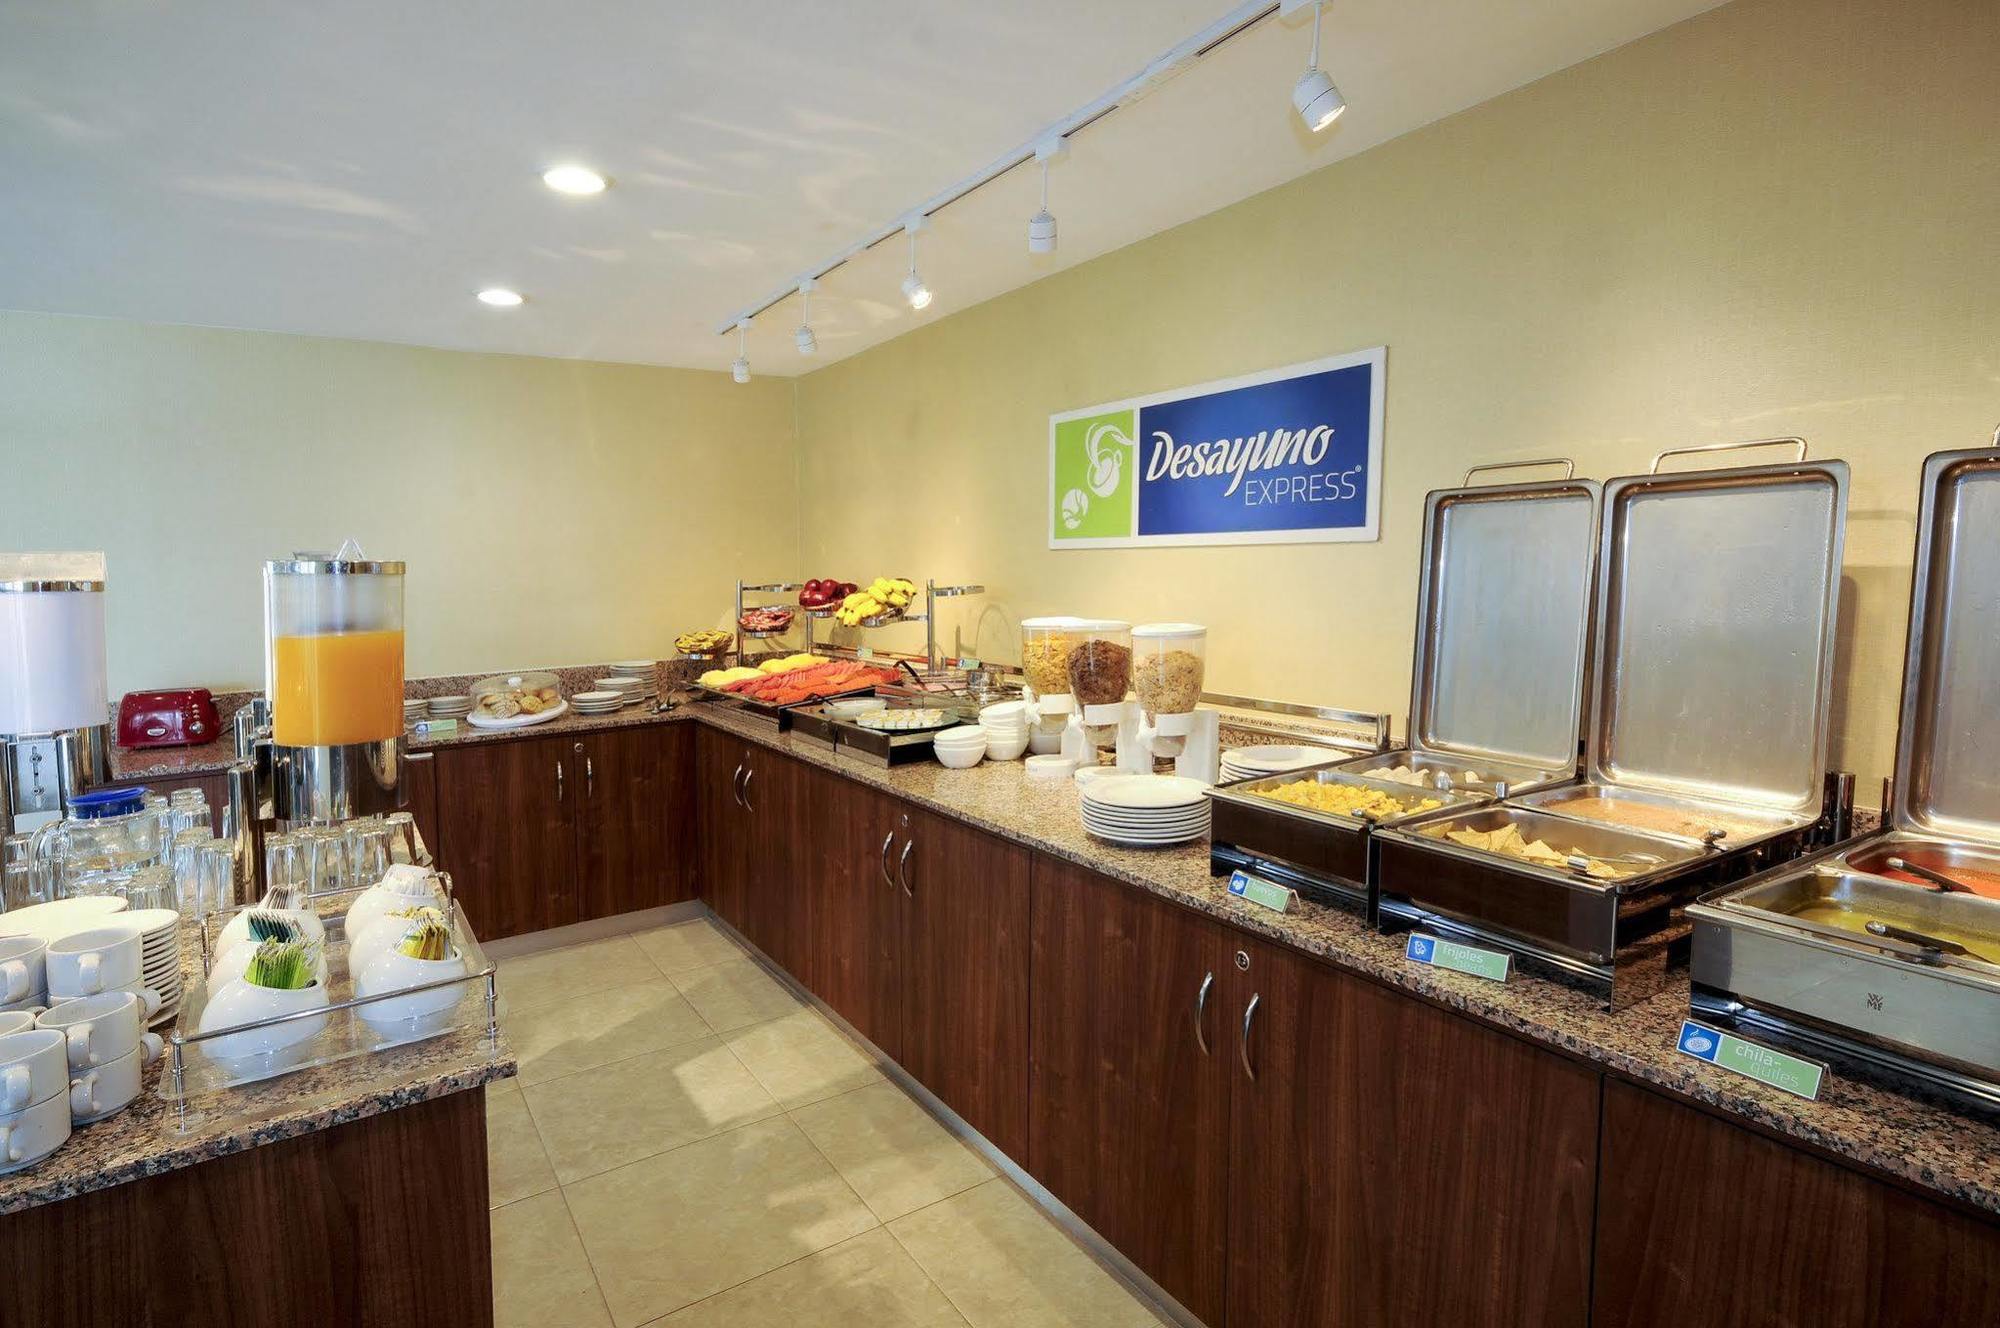 HOLIDAY INN EXPRESS TOLUCA 4* (Mexico) - from £ 40 | HOTELMIX